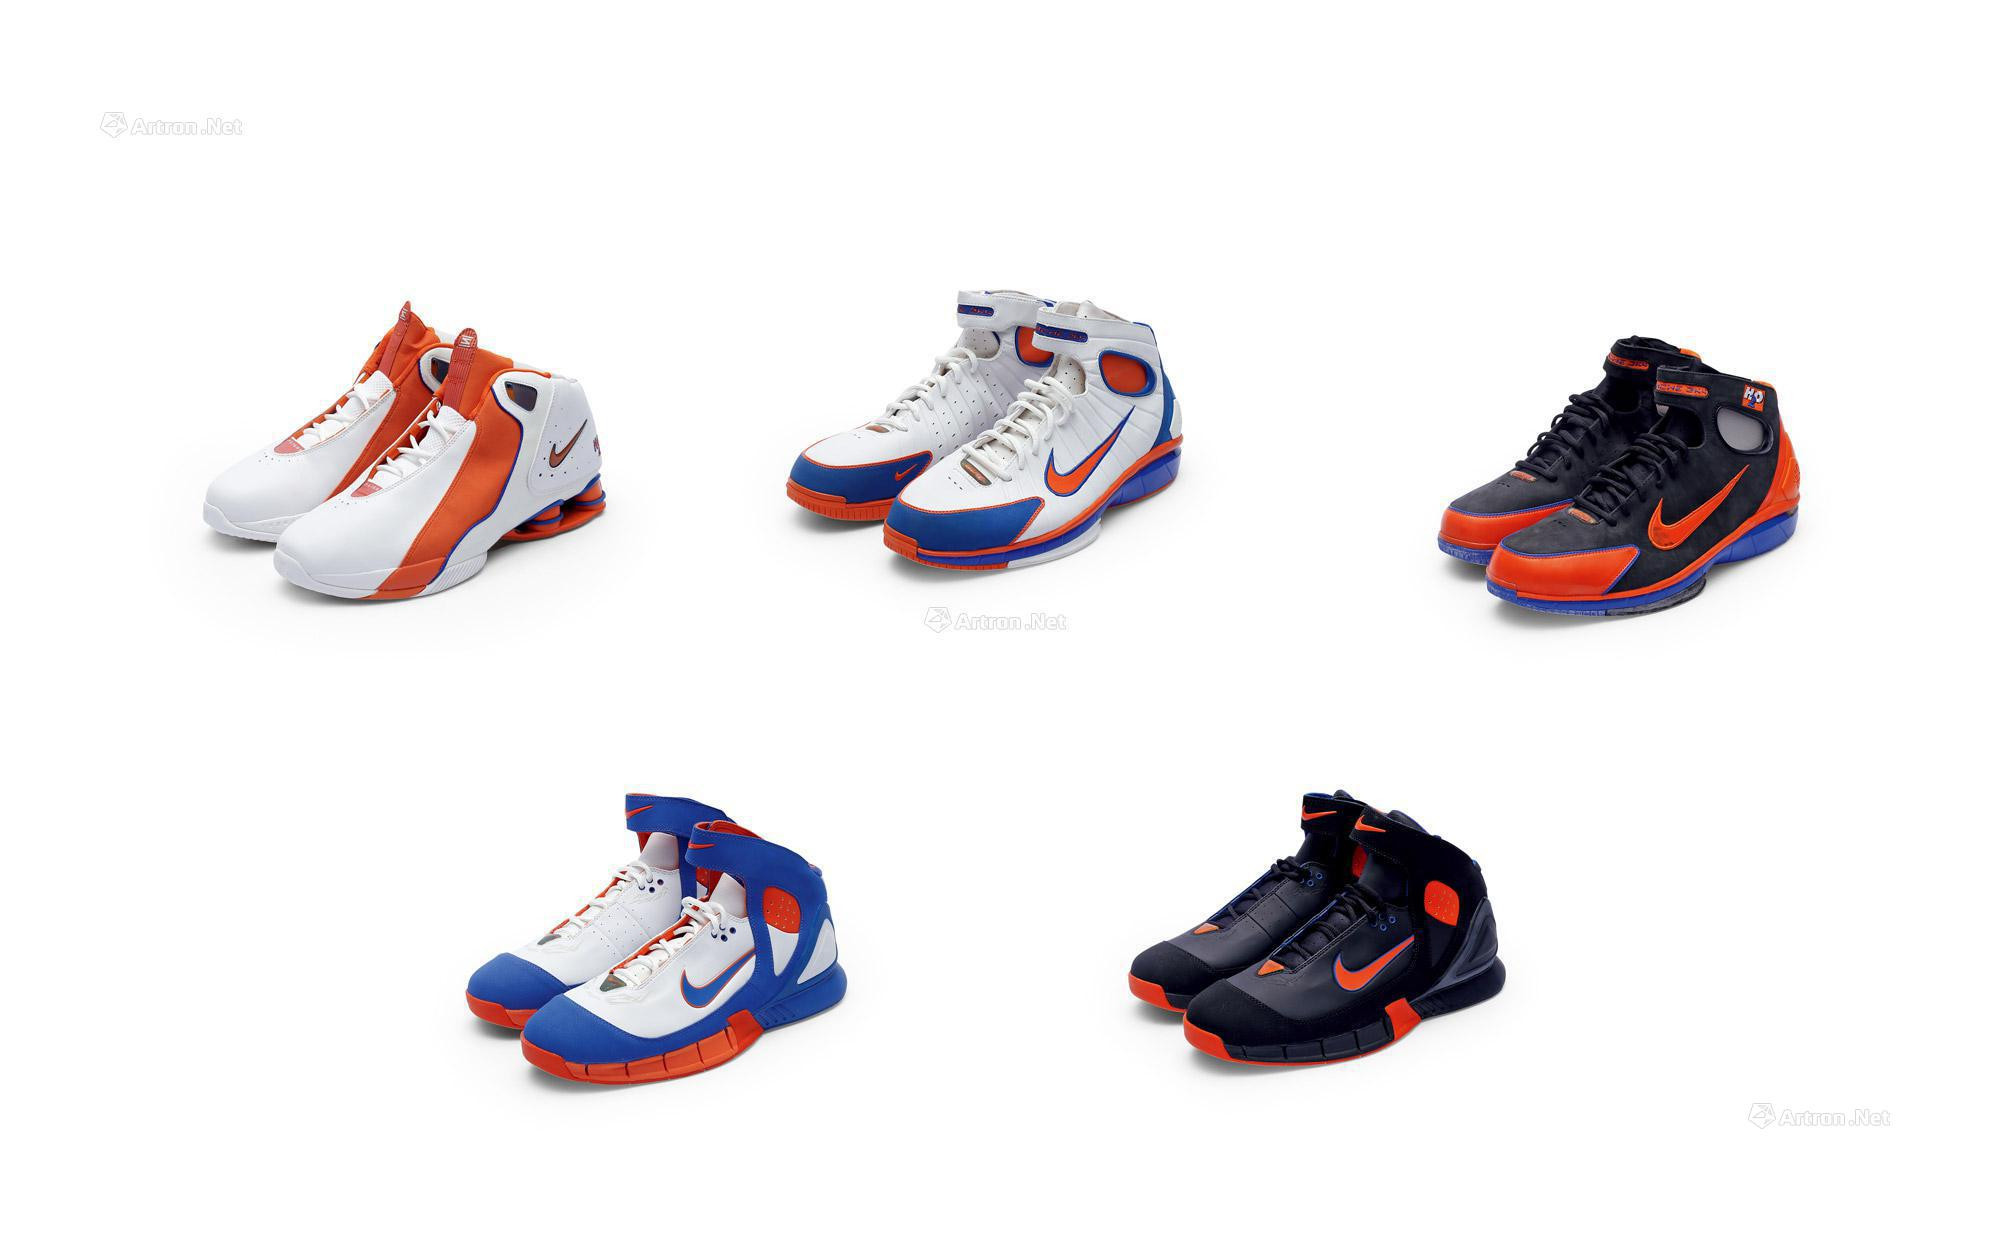 Allan Houston Exclusive Sneaker Collection  5 Pairs of Player Exclusive Sneakers